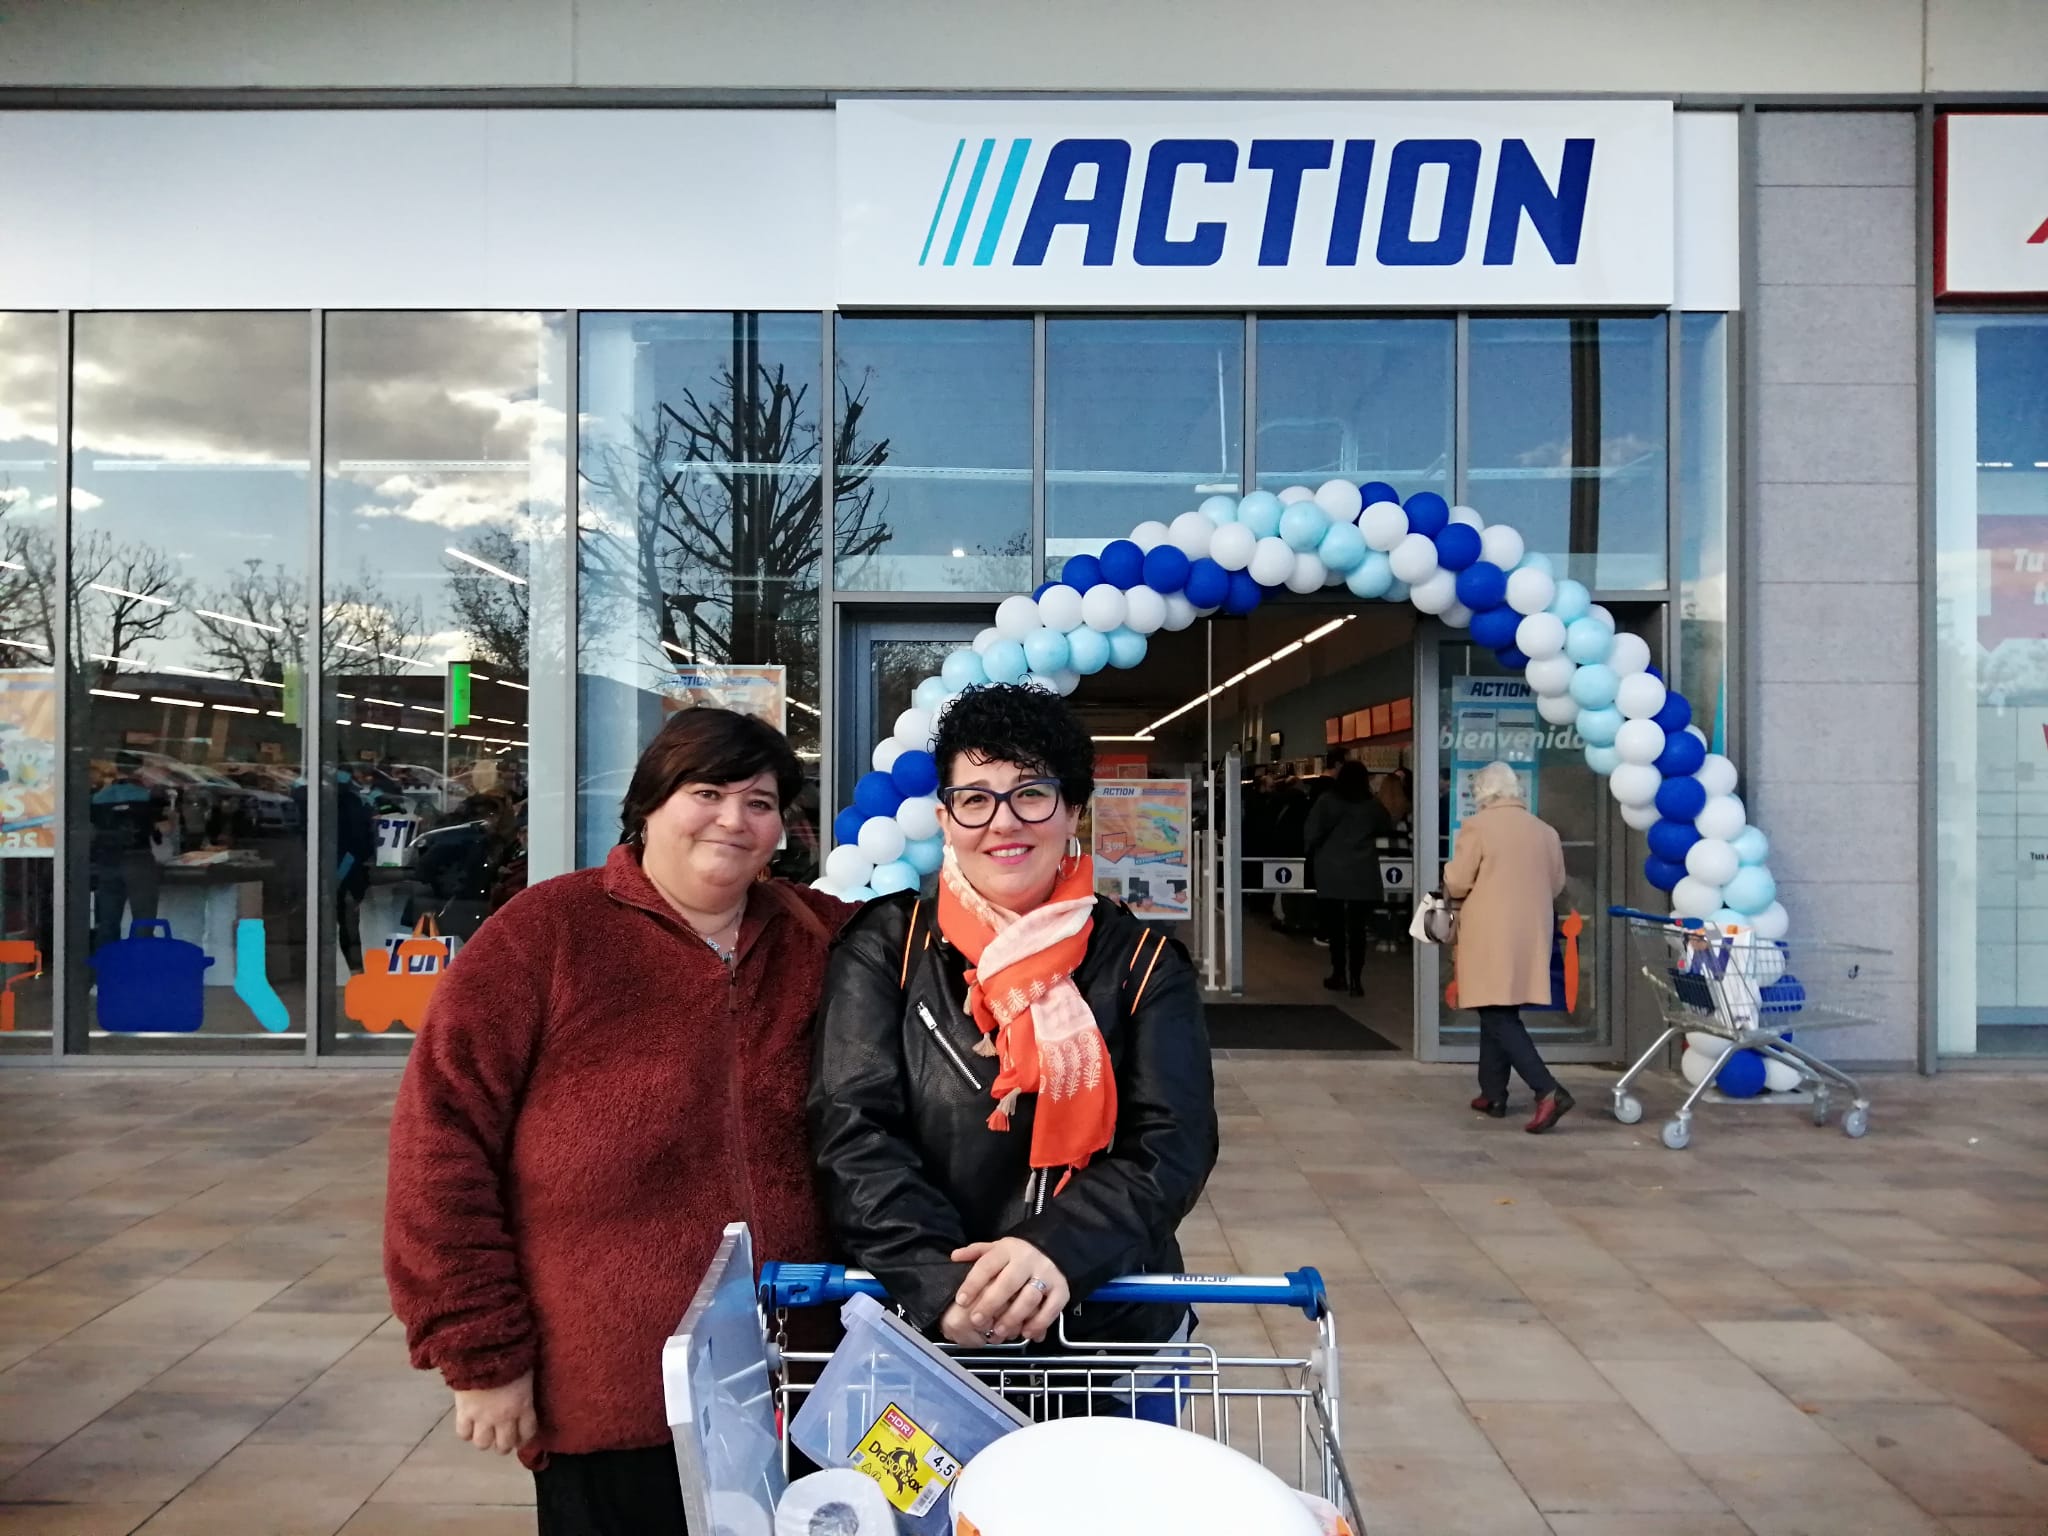 Rosa Lizana and Inma Mora at the opening of the first Action store in Zaragoza.